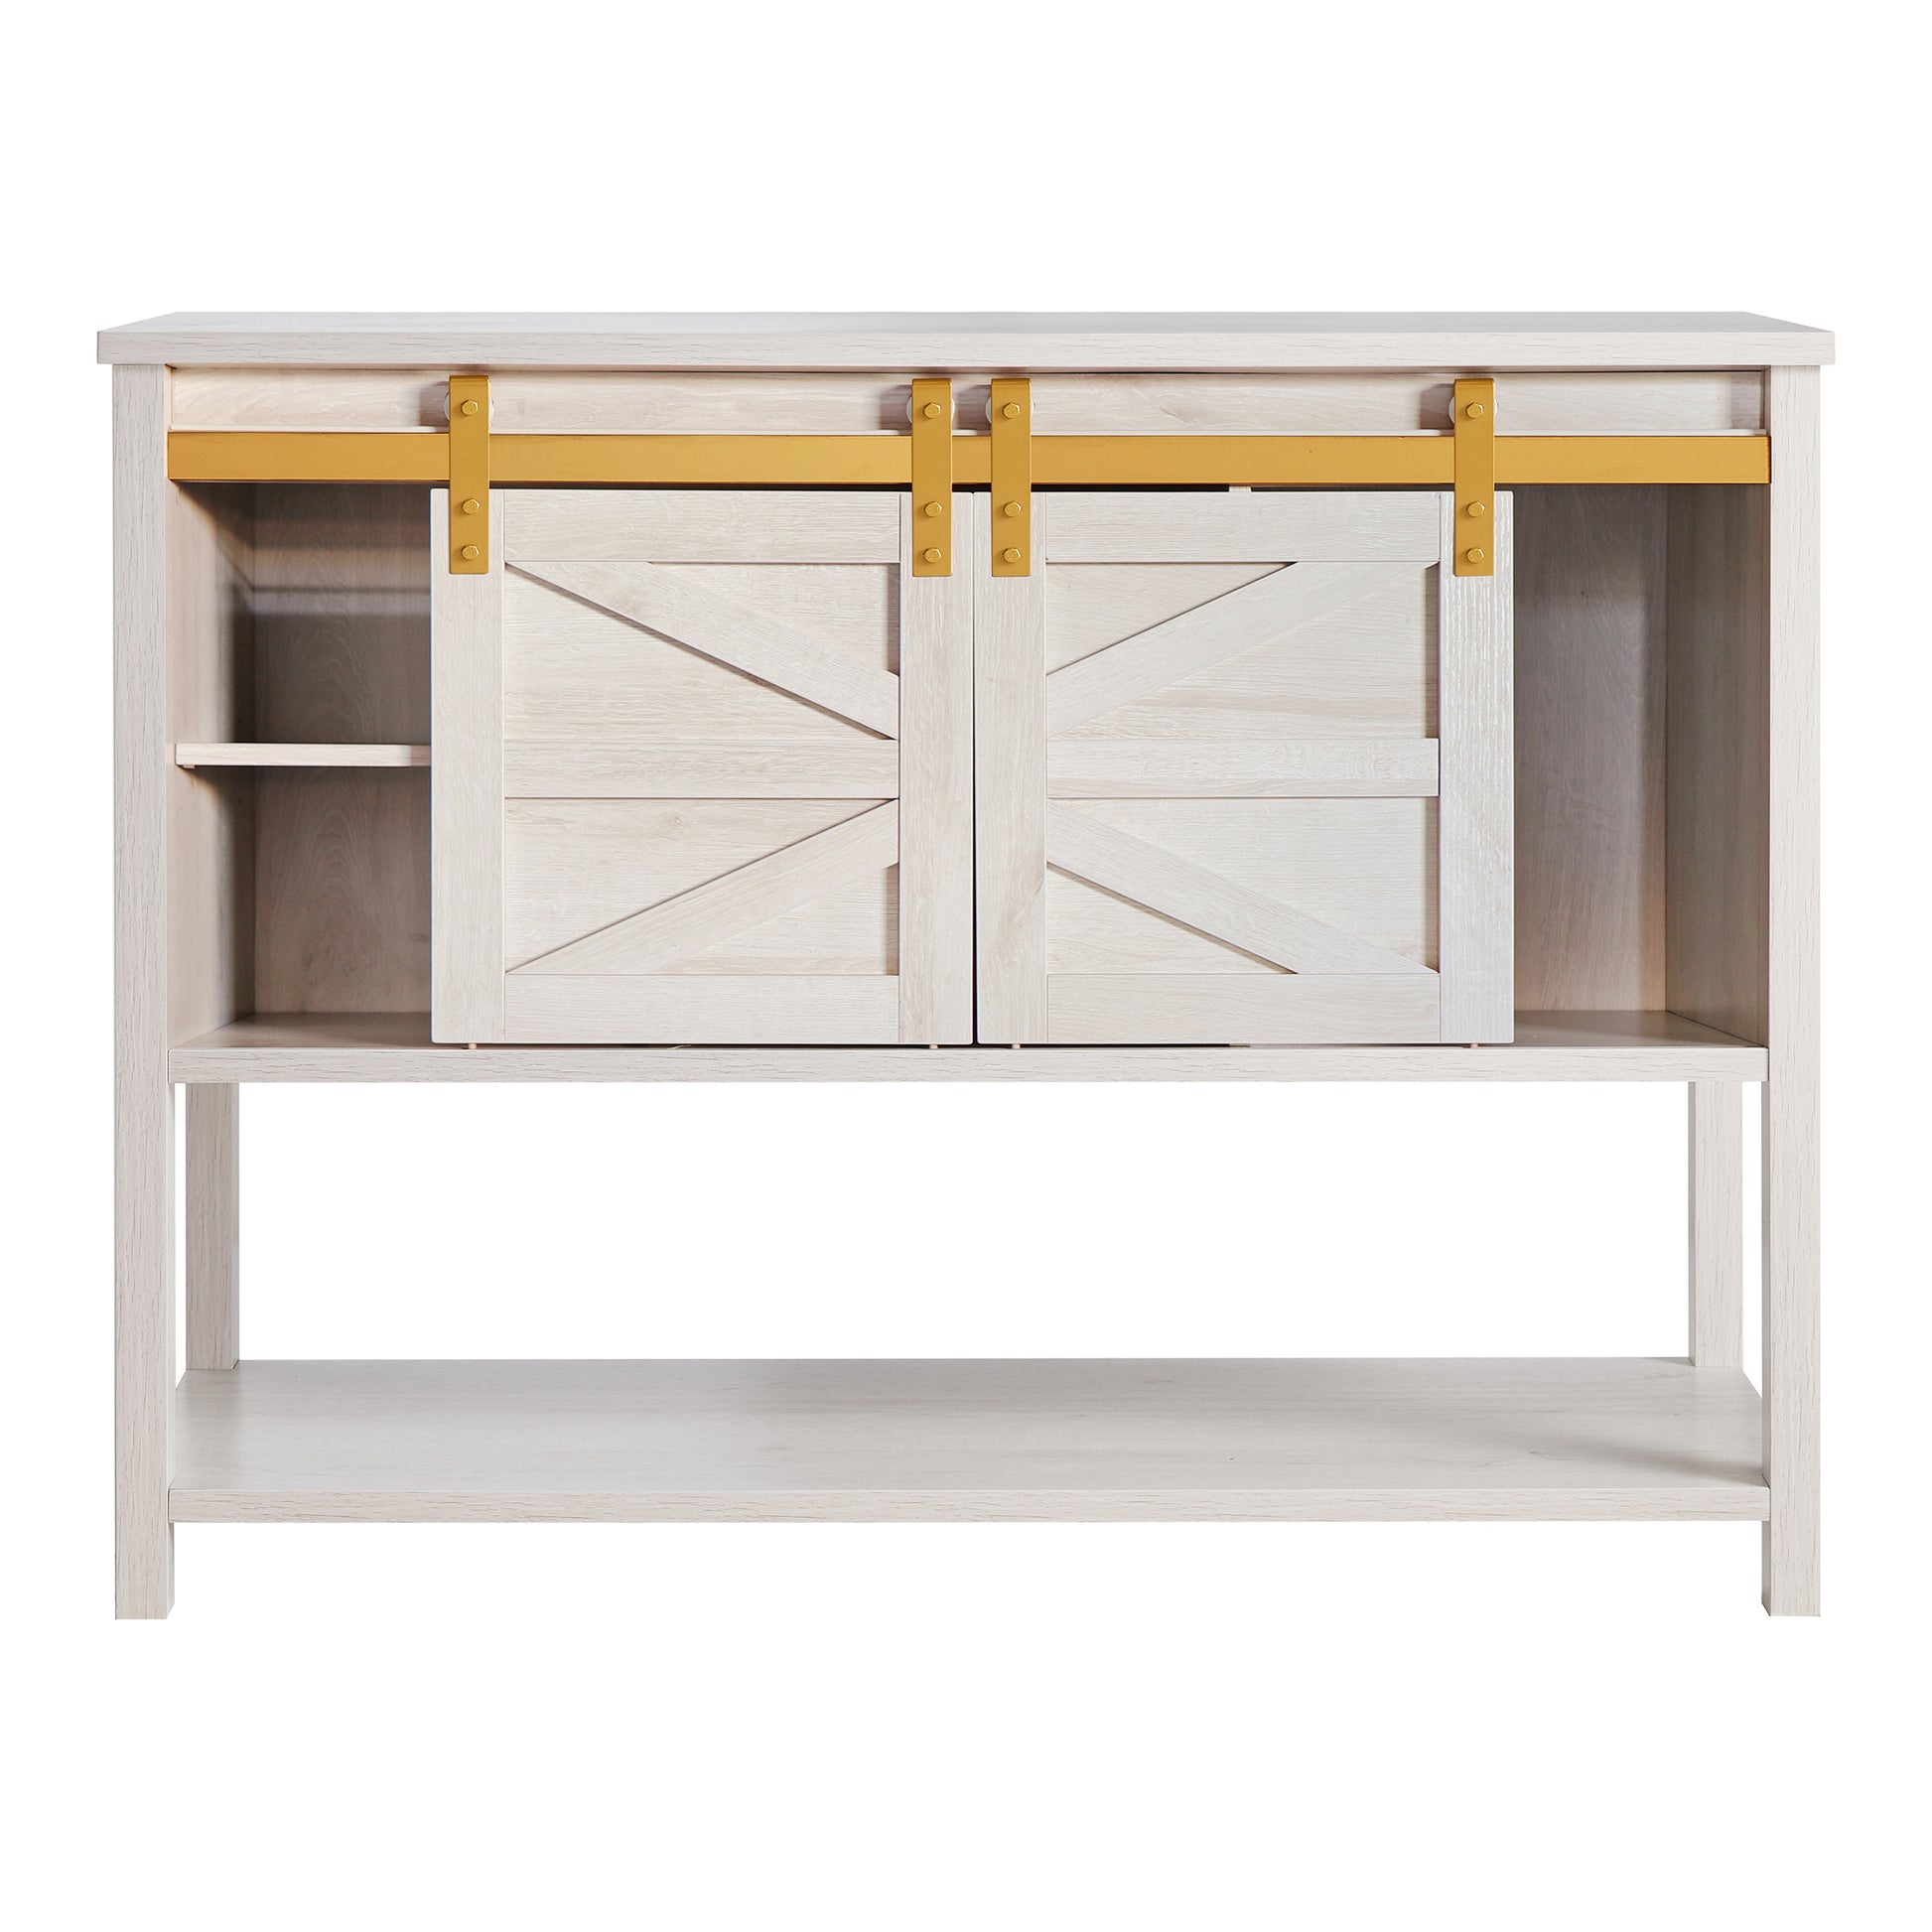 Front-facing modern farmhouse white oak sliding door four-shelf buffet with doors centered on a white background